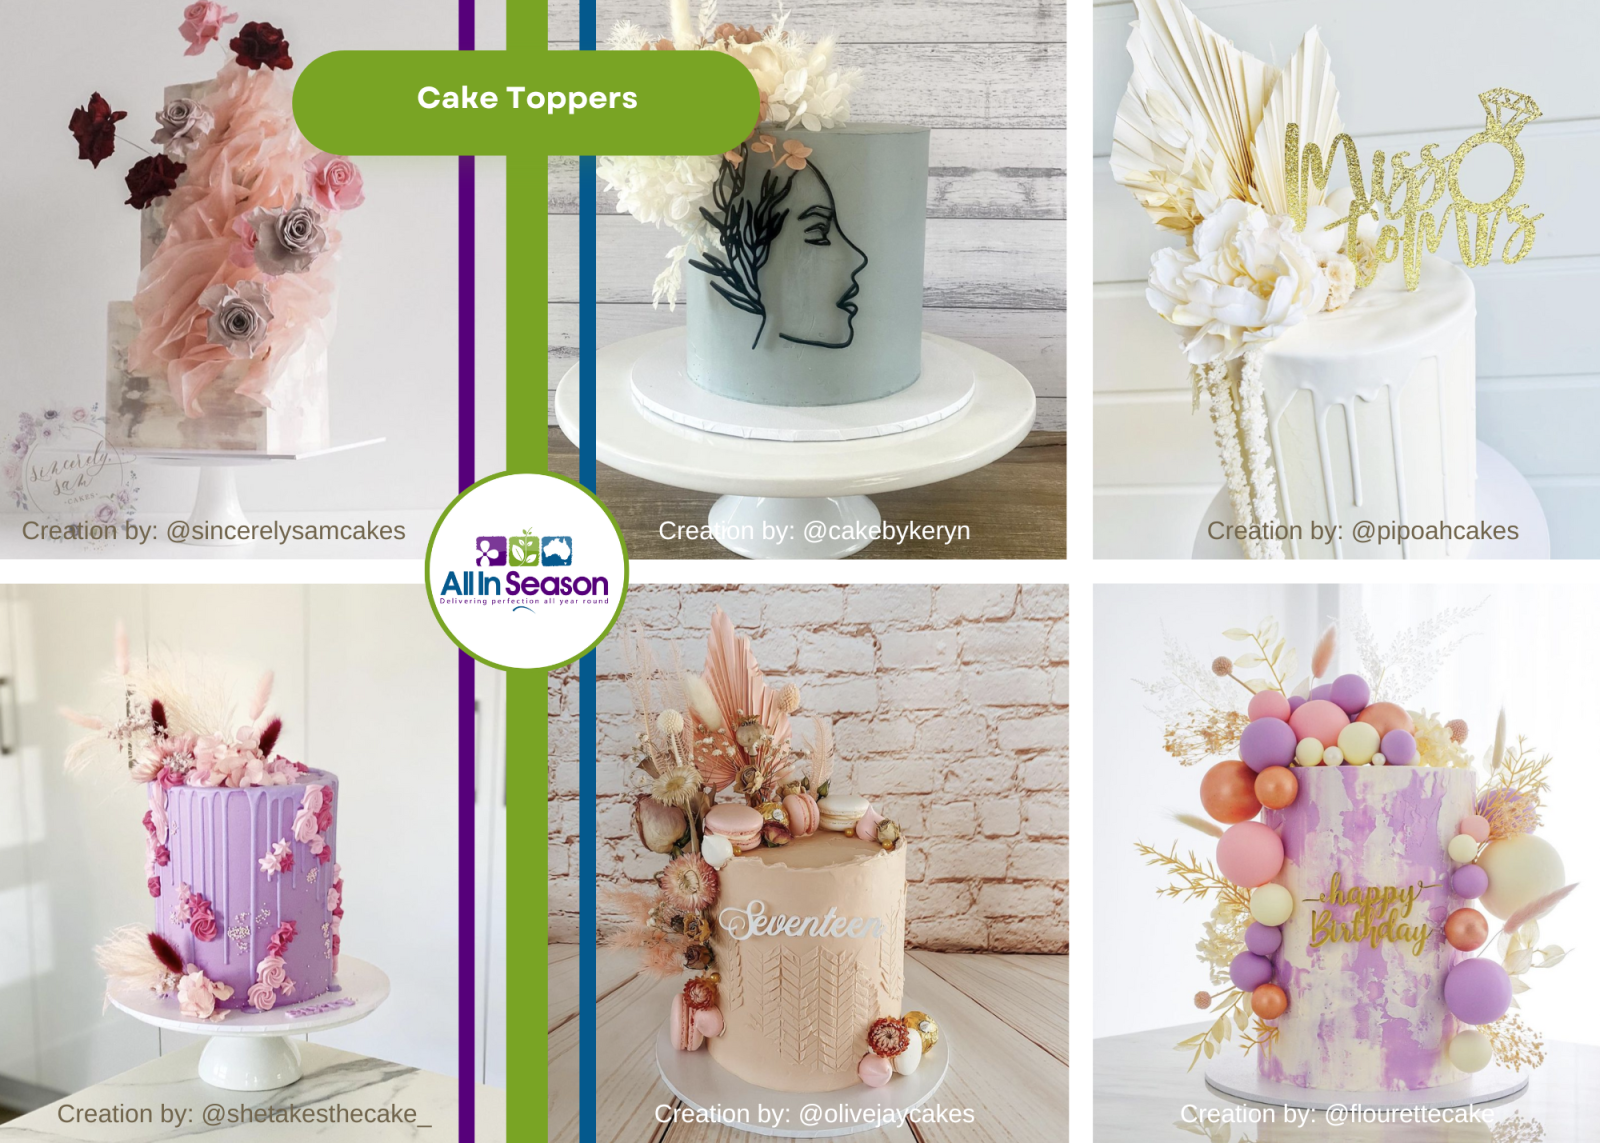 Examples of dried flowers as cake decorations